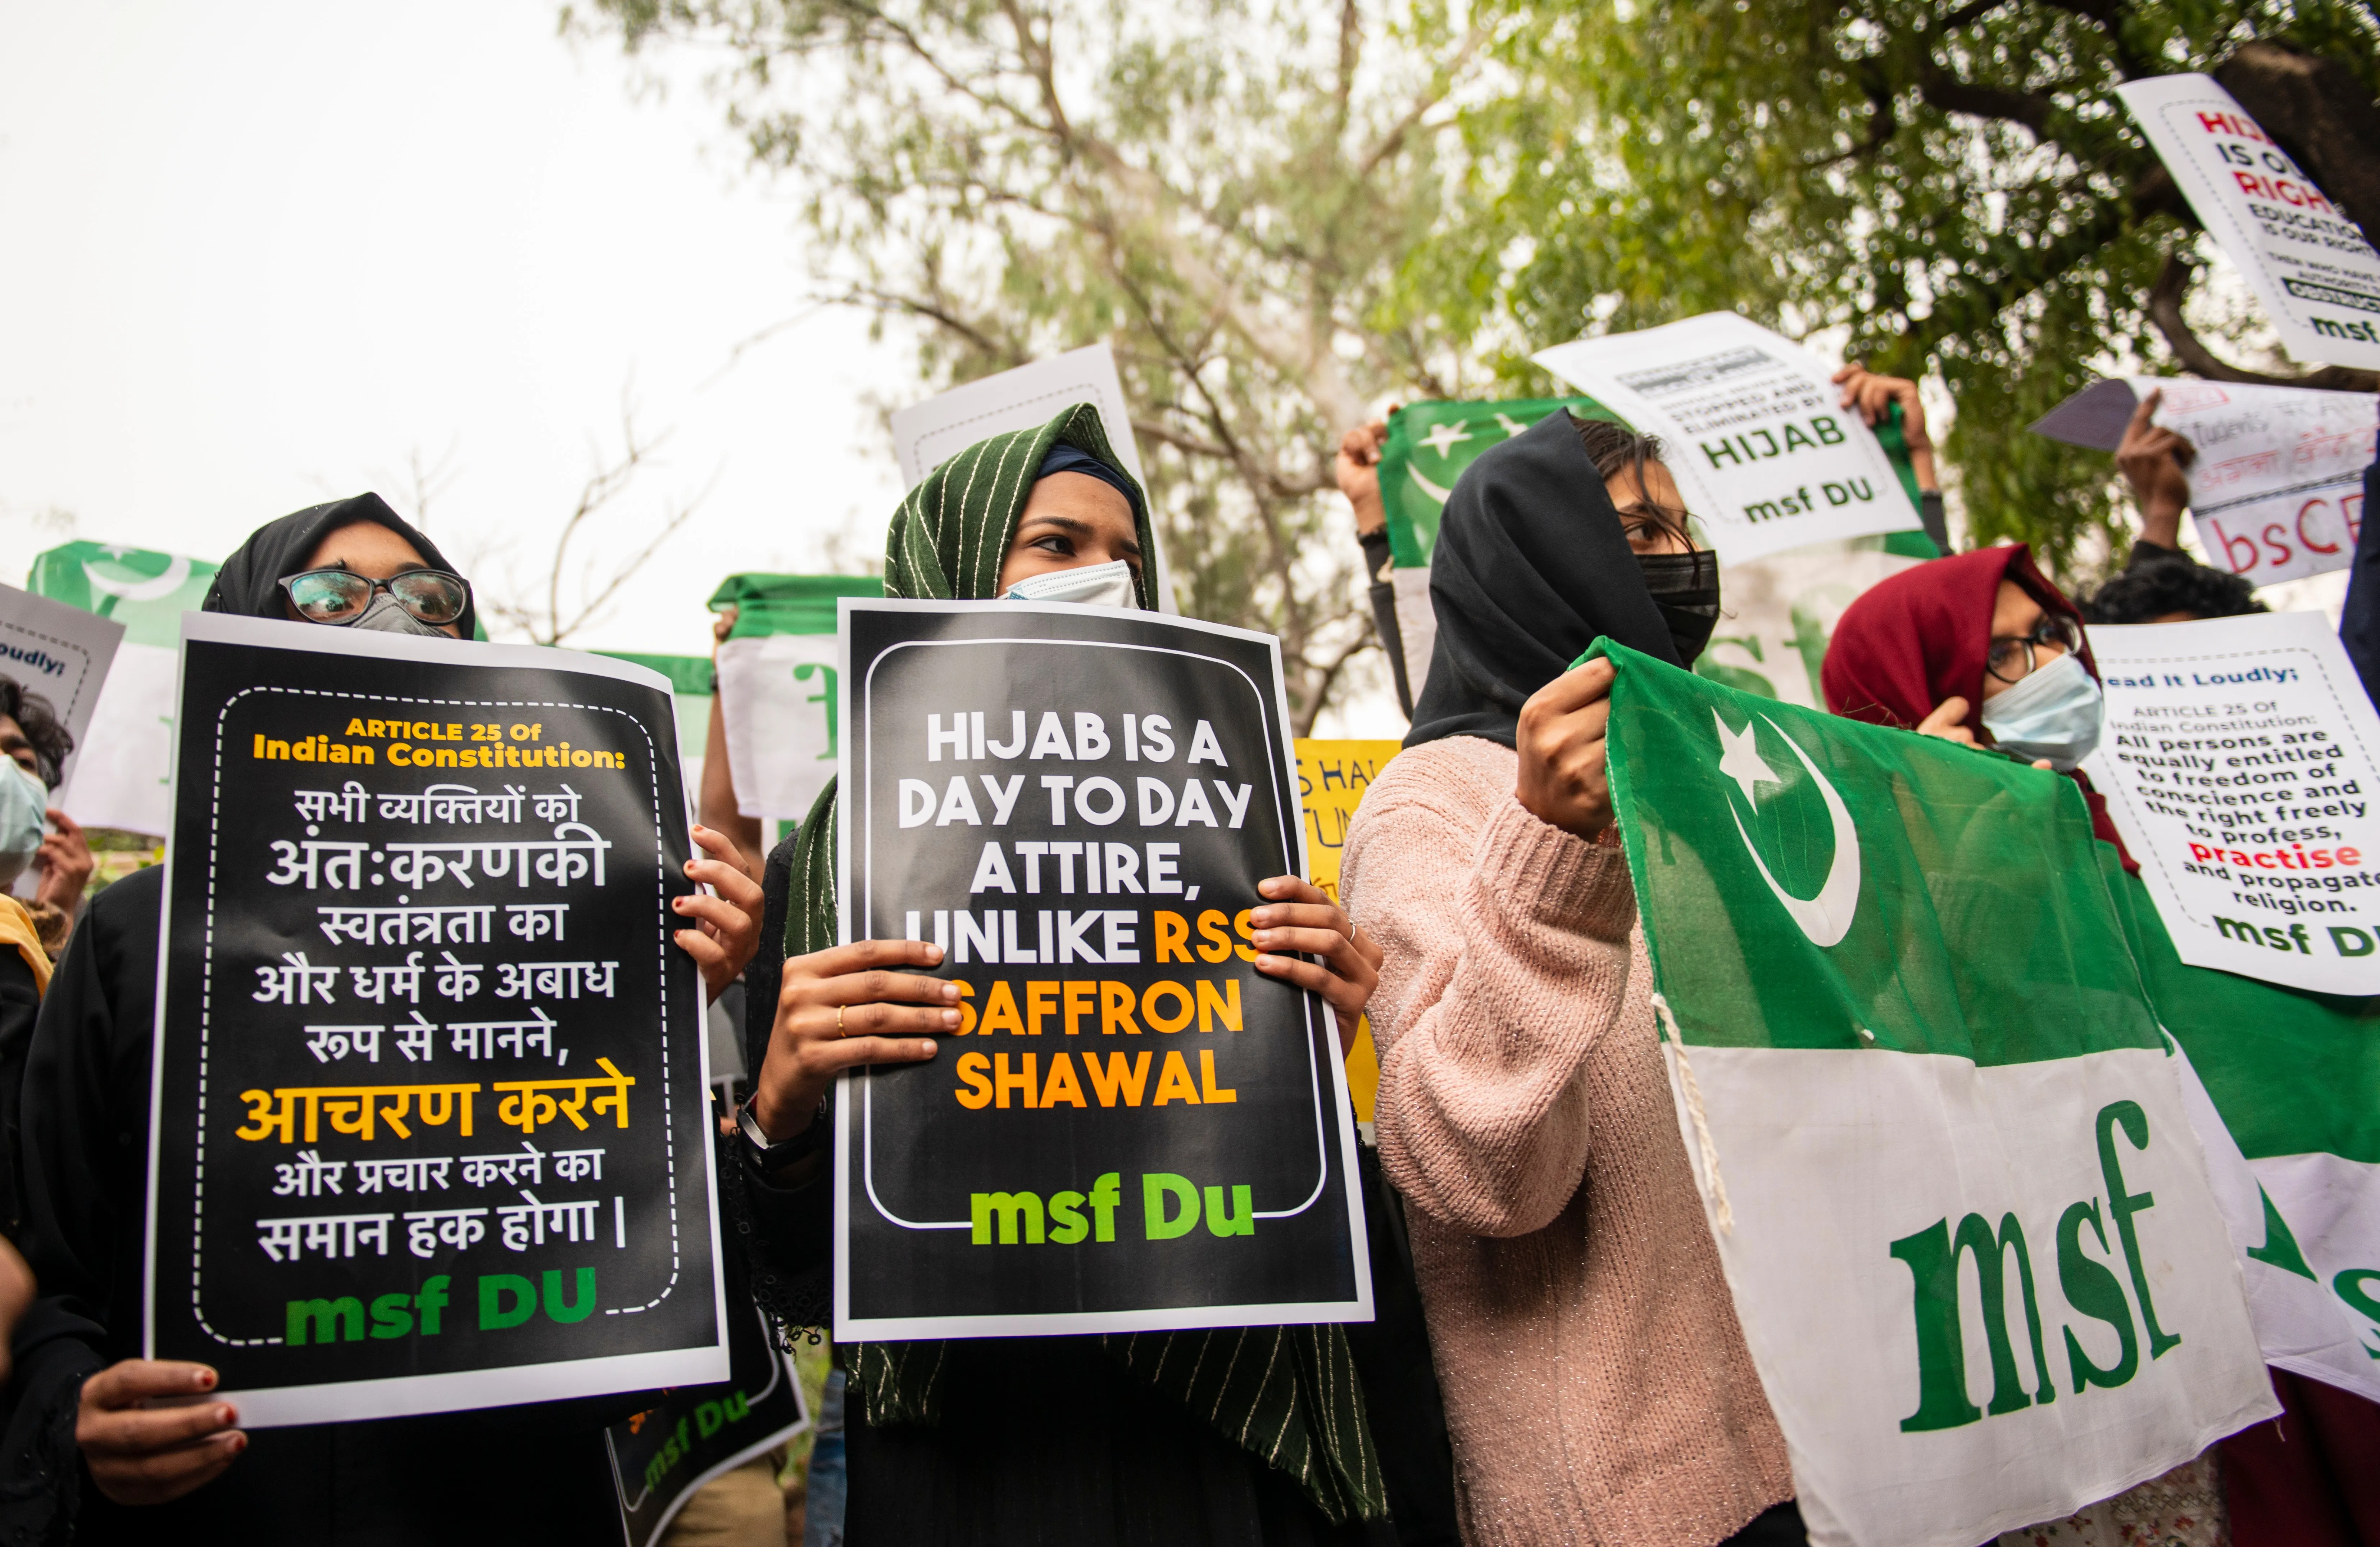 Members of All India Muslim Students Federation protest against the hijab ban in educational institutions by the Karnataka government at Delhi University in New Delhi, India, Feb. 9, 2022.?w=200&h=150